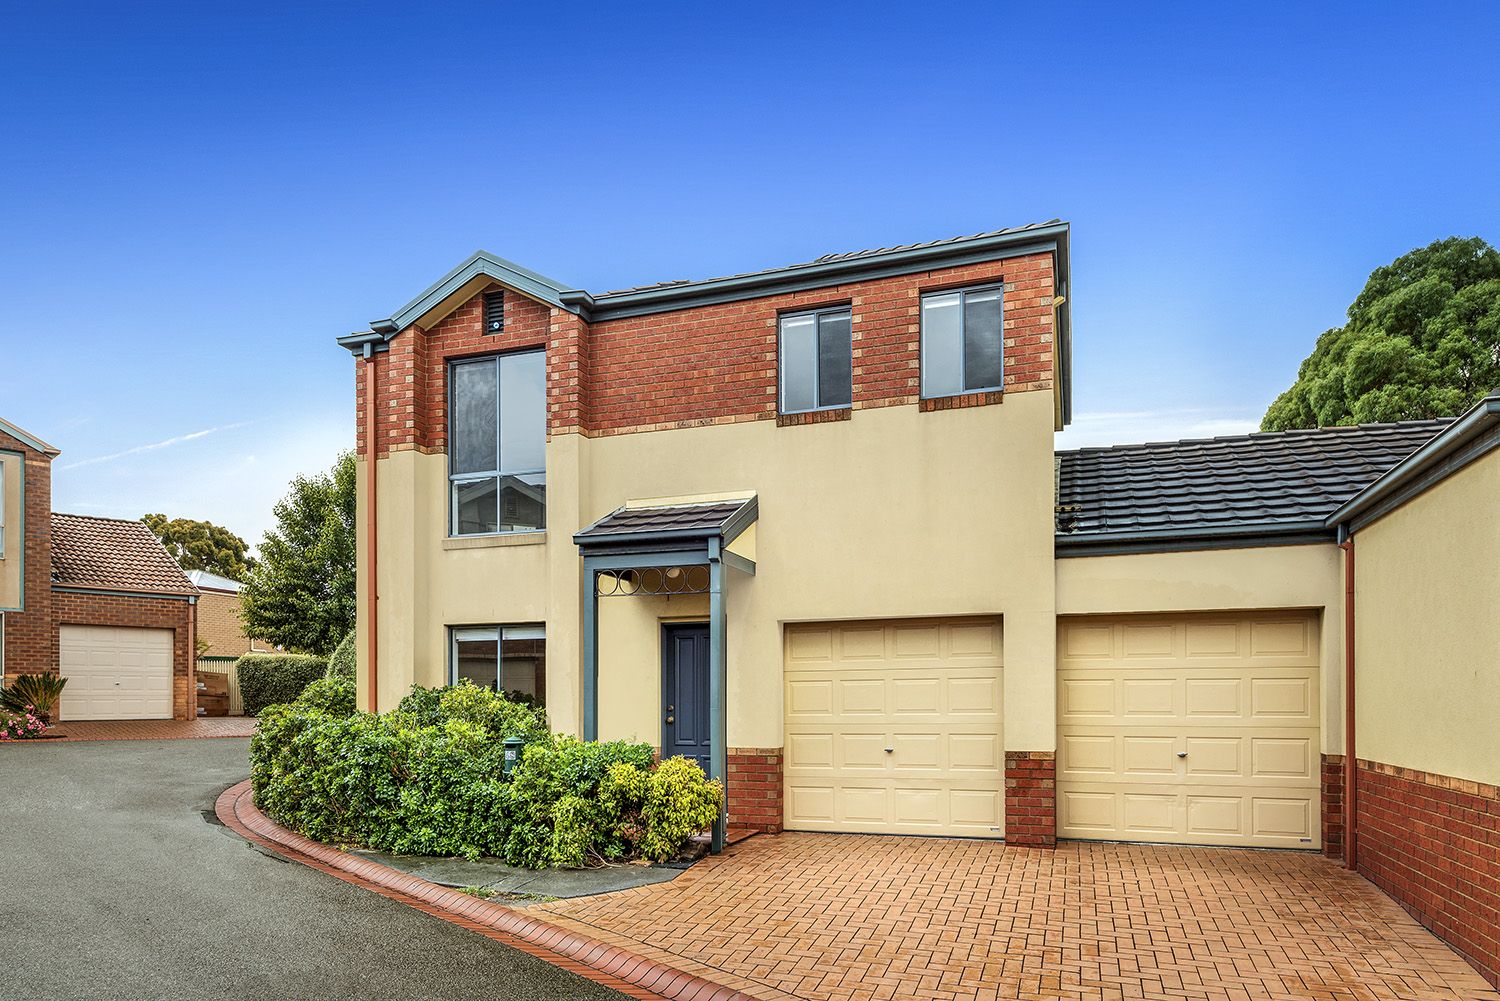 48 St Laurant Rise, Knoxfield VIC 3180 - Townhouse For Rent - $440 | Domain